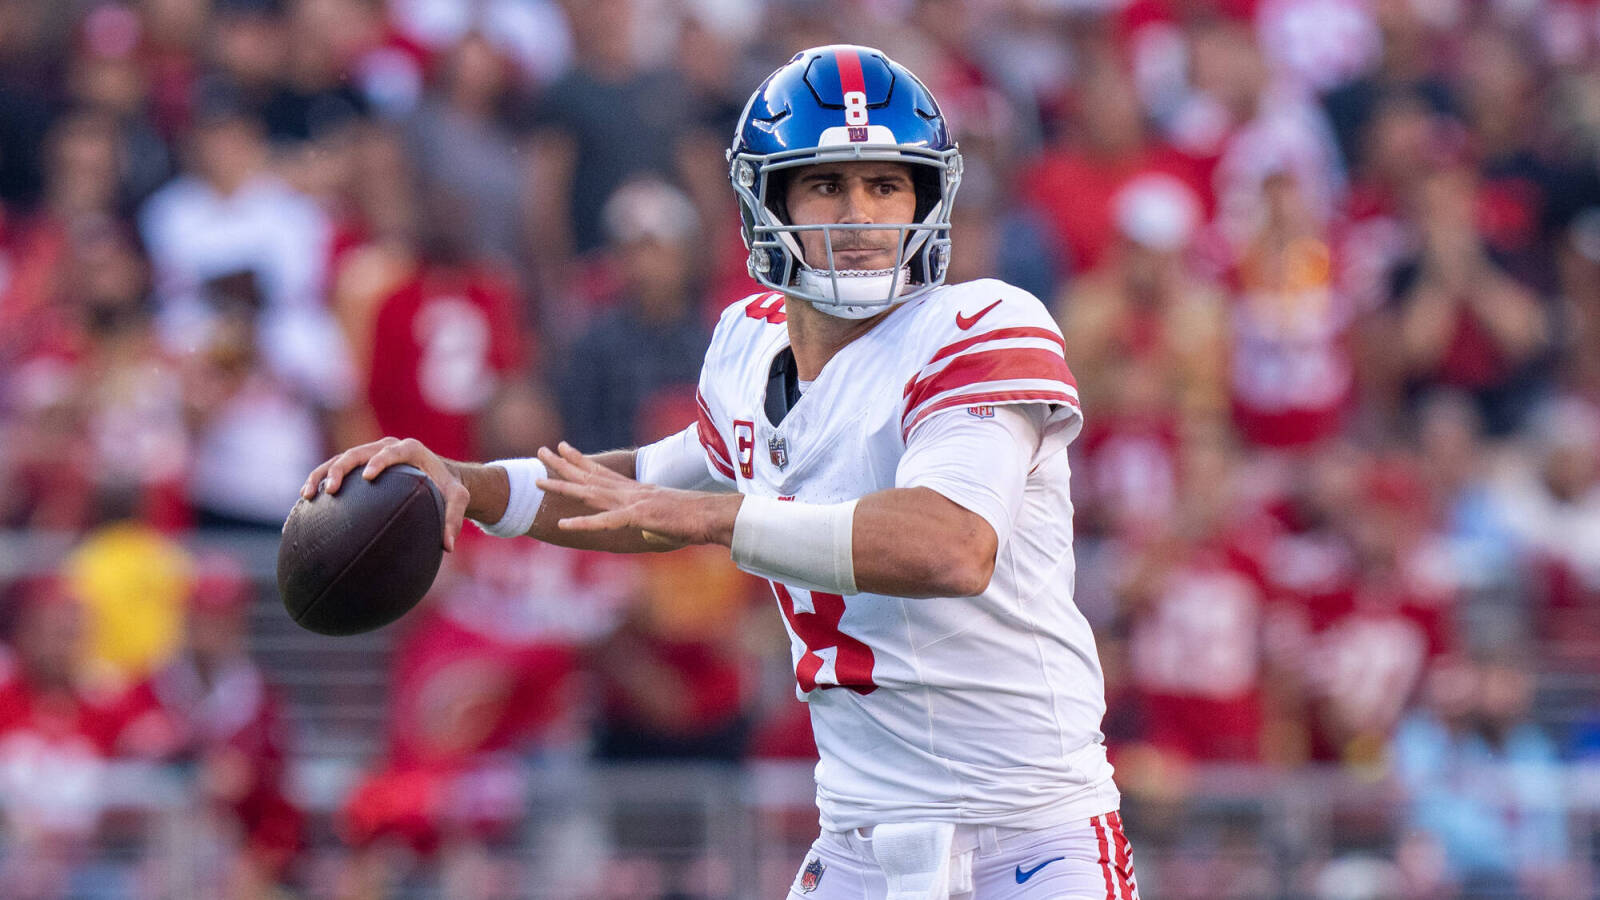 Reporter weighs in on potential Giants quarterback controversy